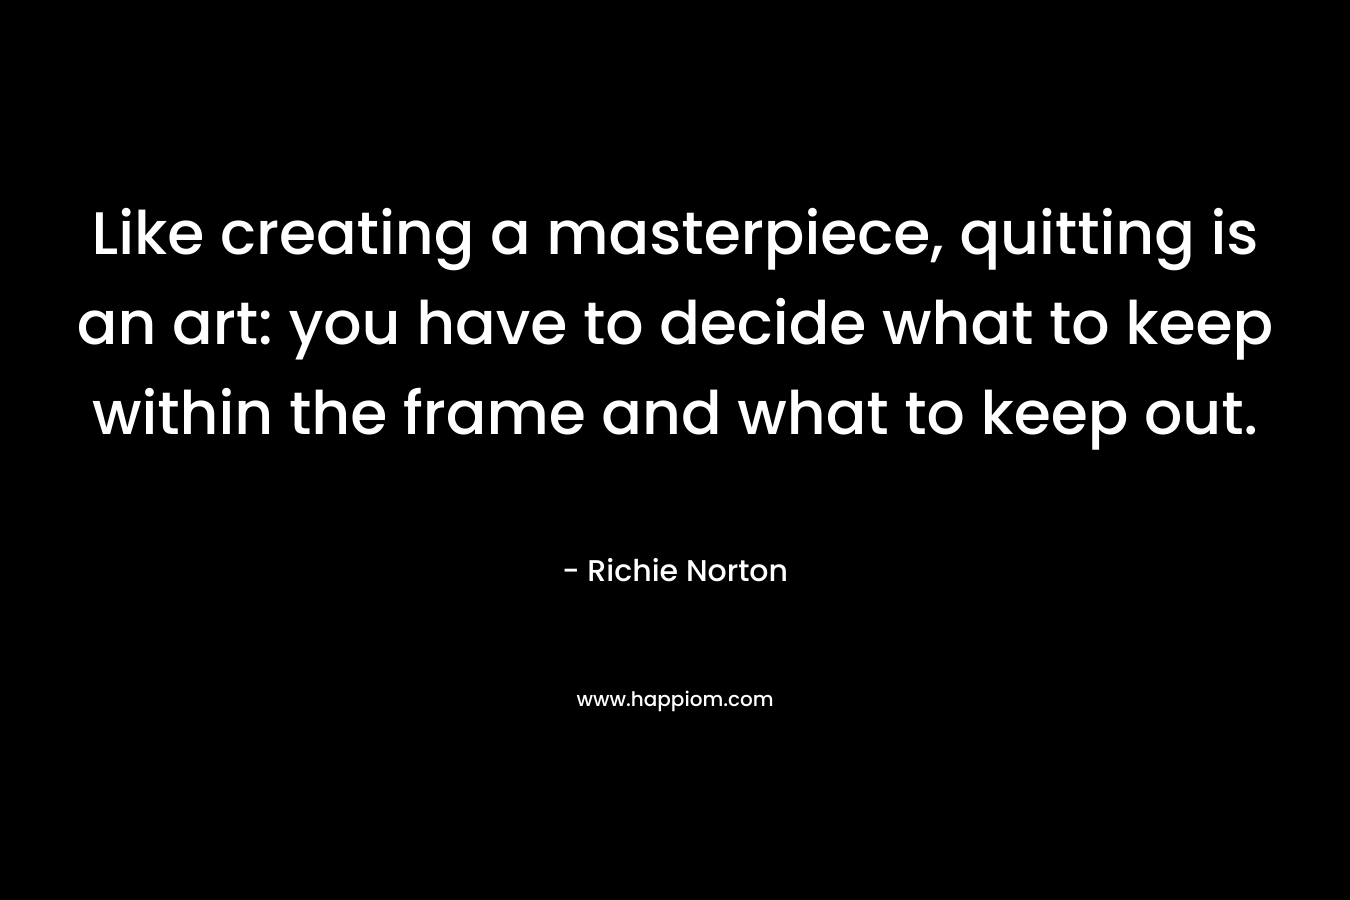 Like creating a masterpiece, quitting is an art: you have to decide what to keep within the frame and what to keep out. – Richie Norton